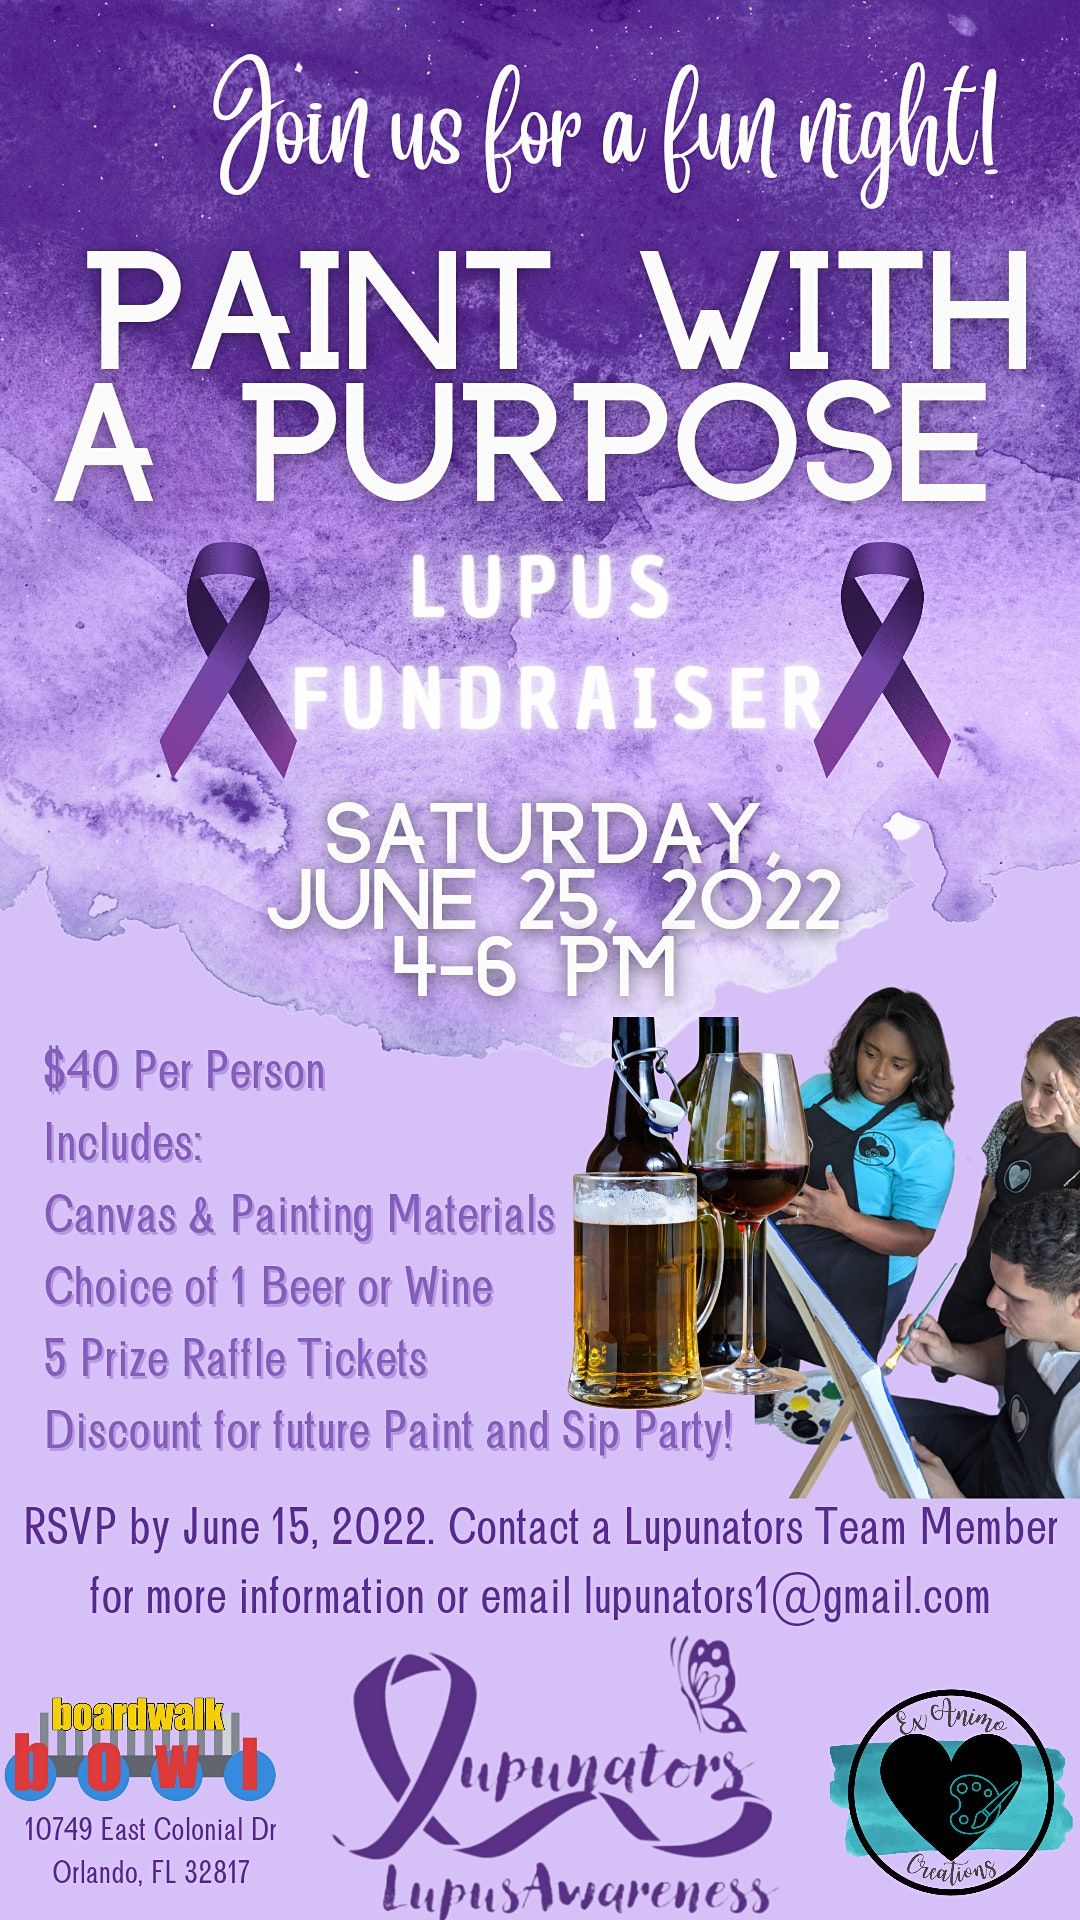 Paint with a Purpose- Lupus Fundraiser